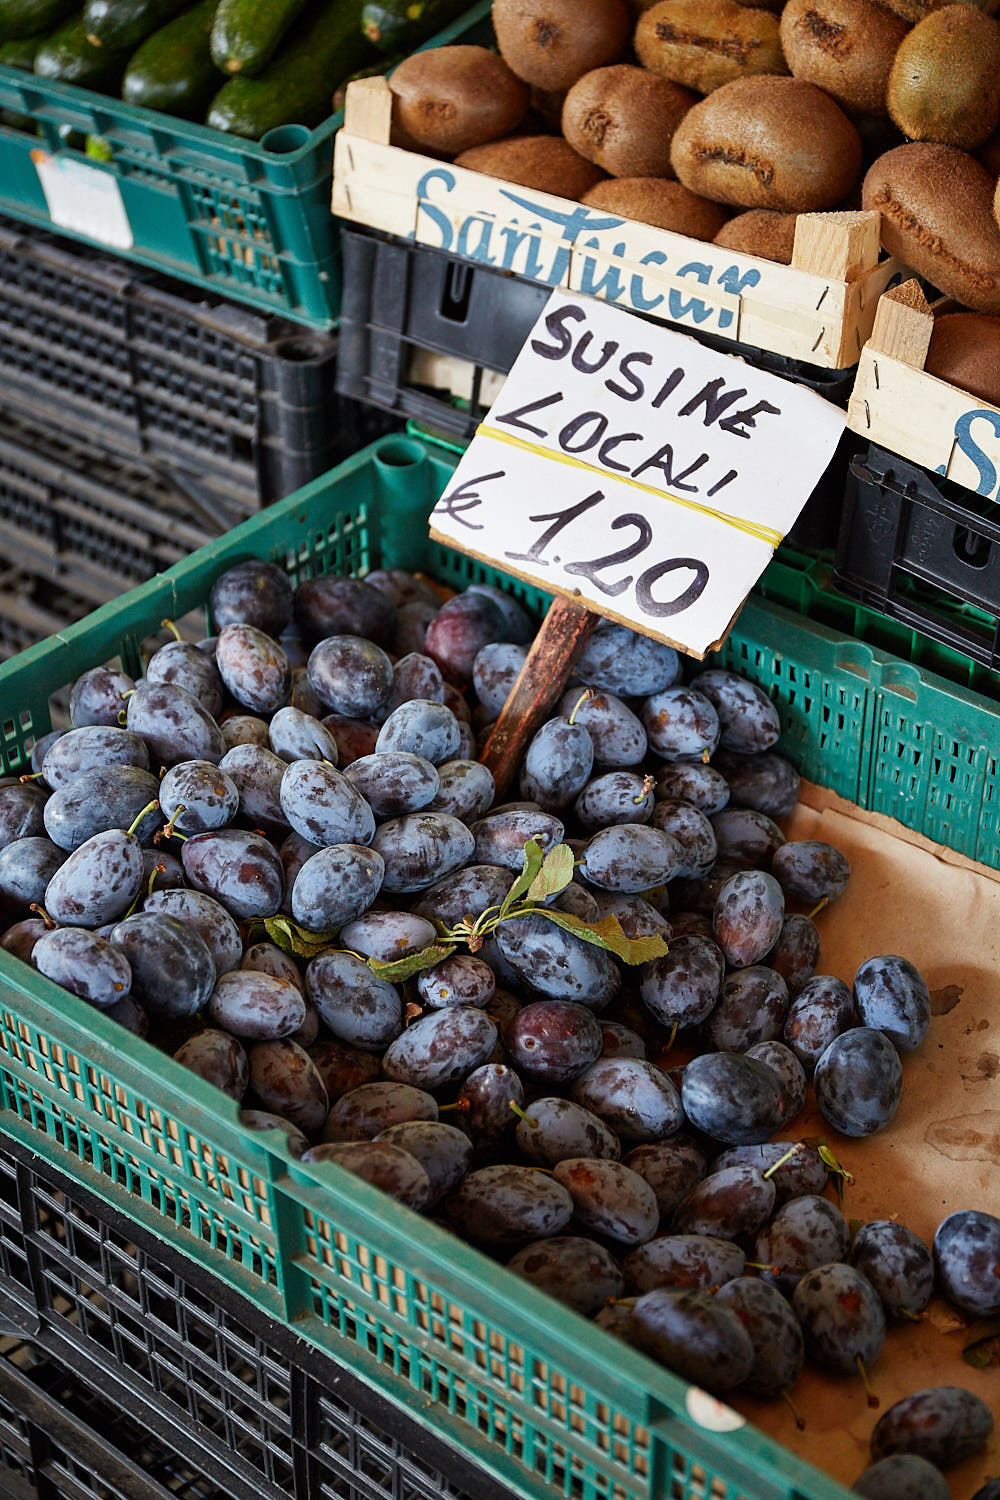 Prunes at the market in Bari Italy